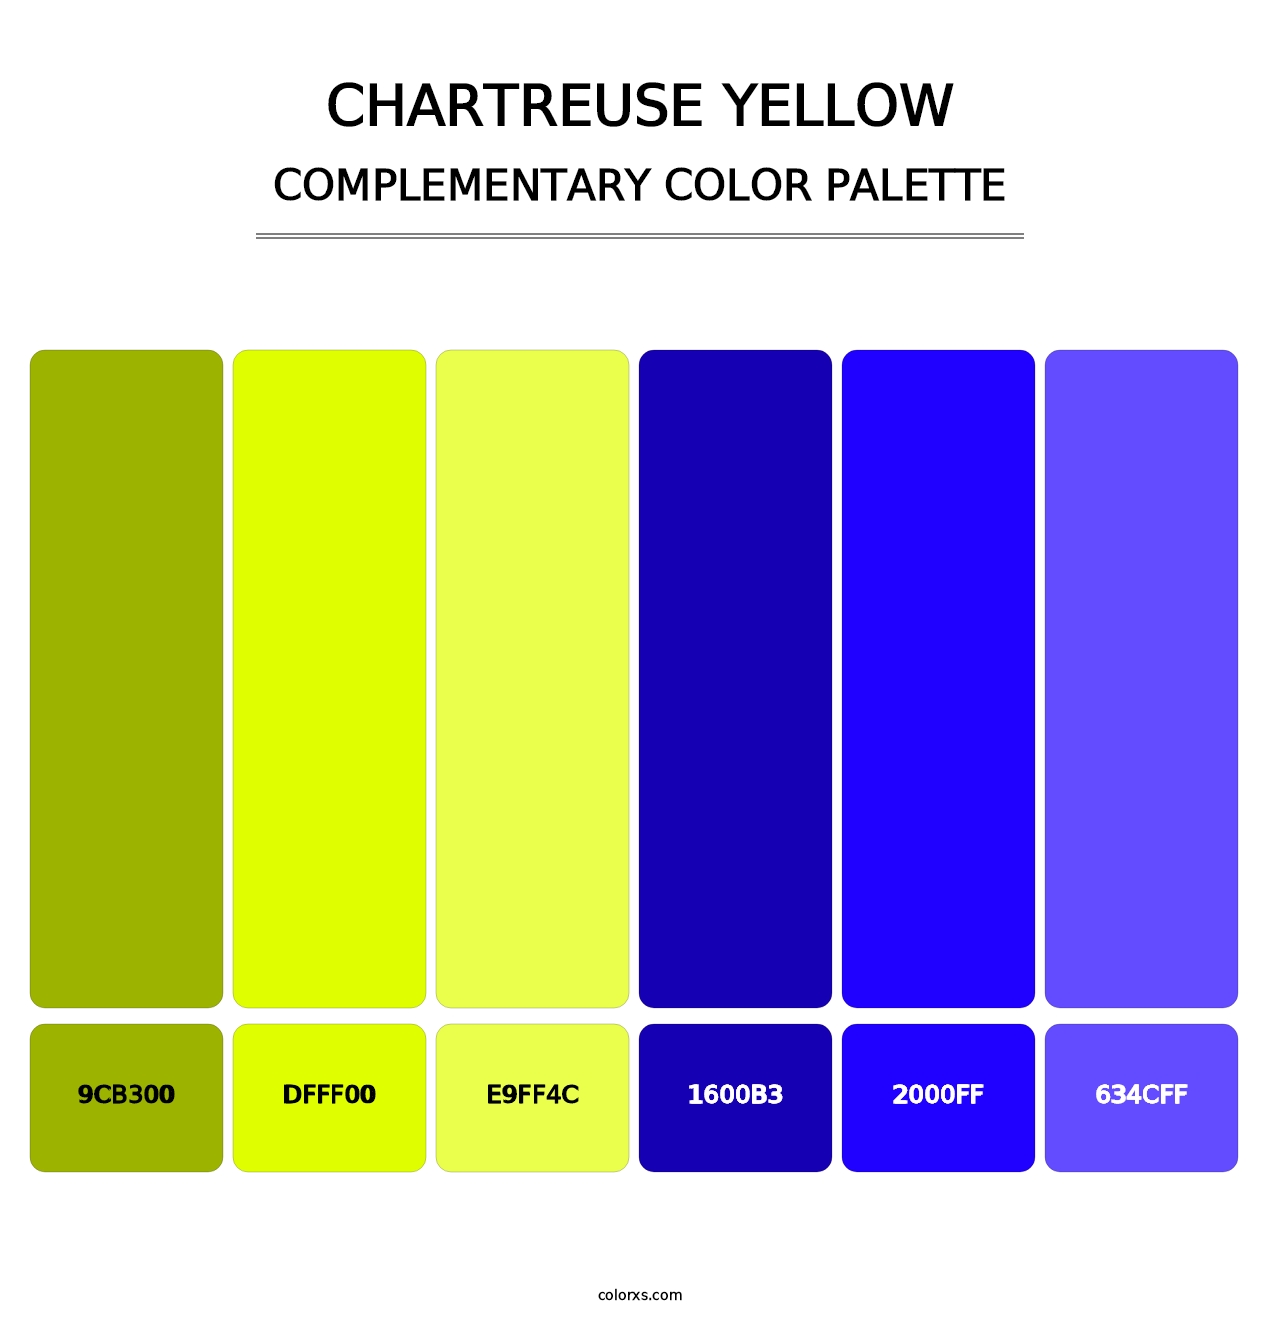 Chartreuse Yellow - Complementary Color Palette